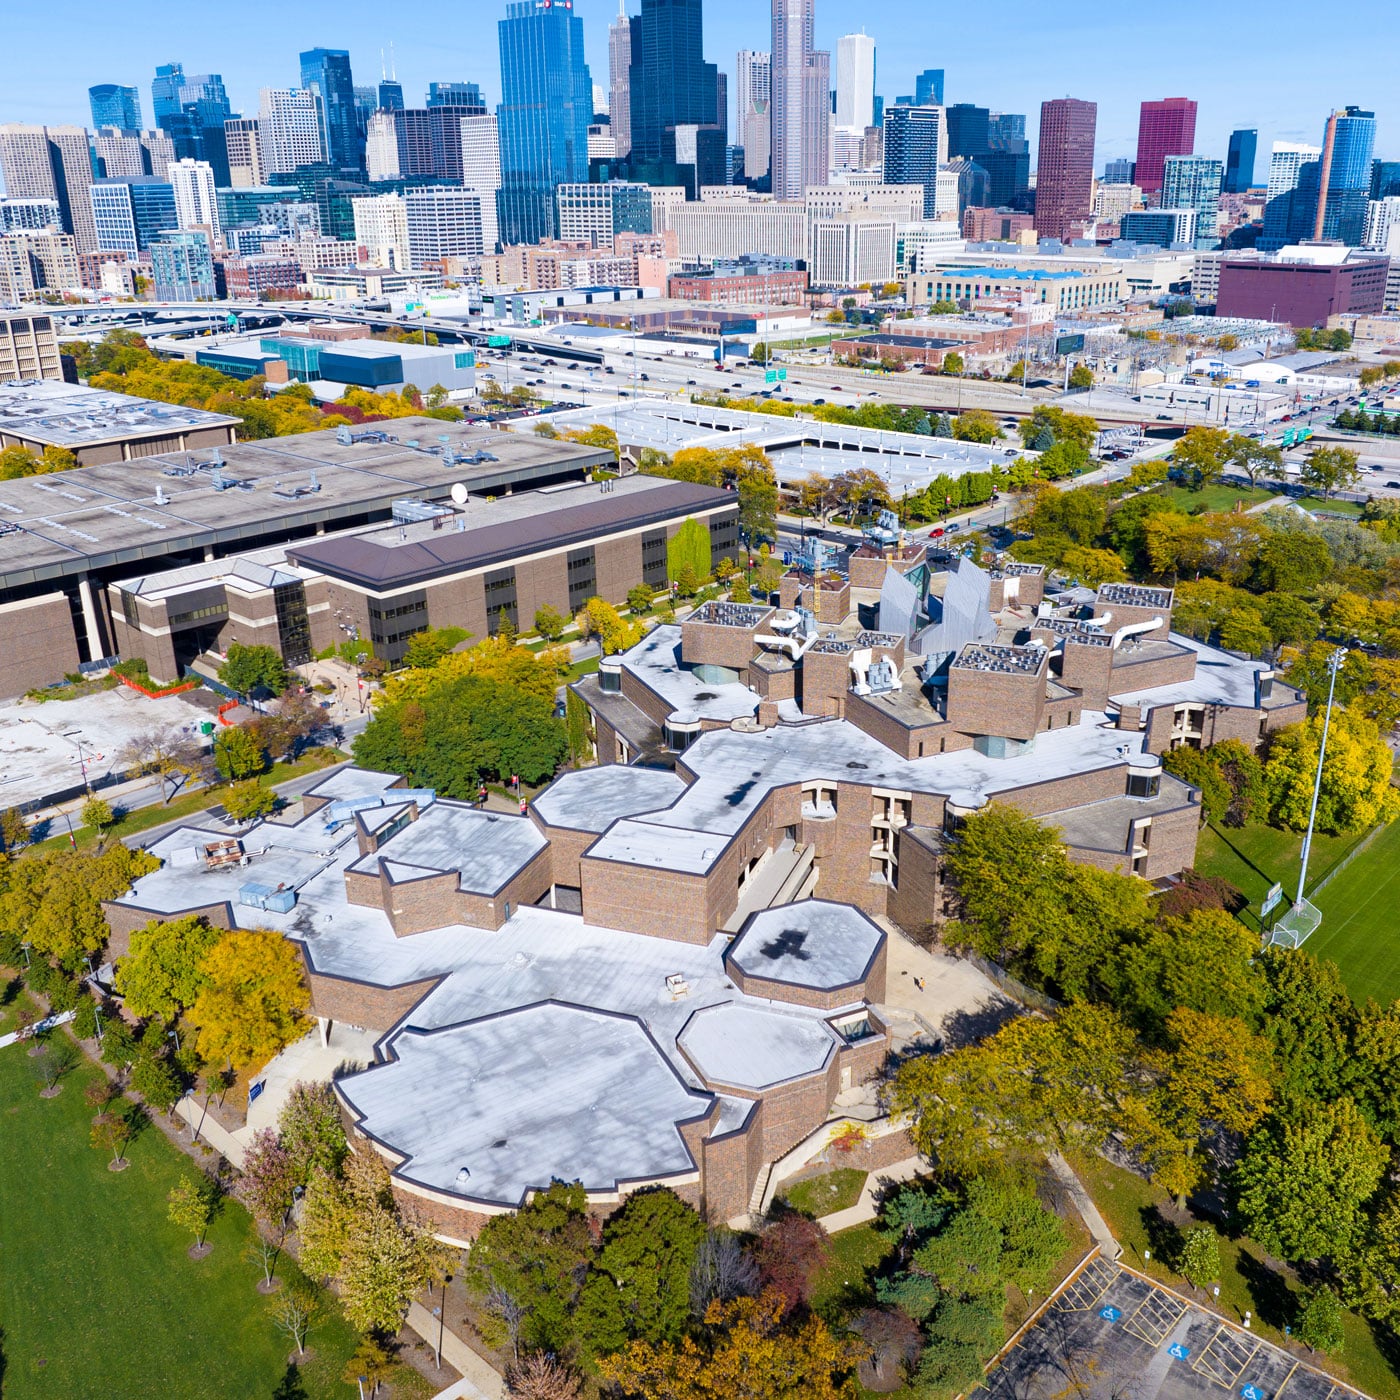 UIC as pictured from the air